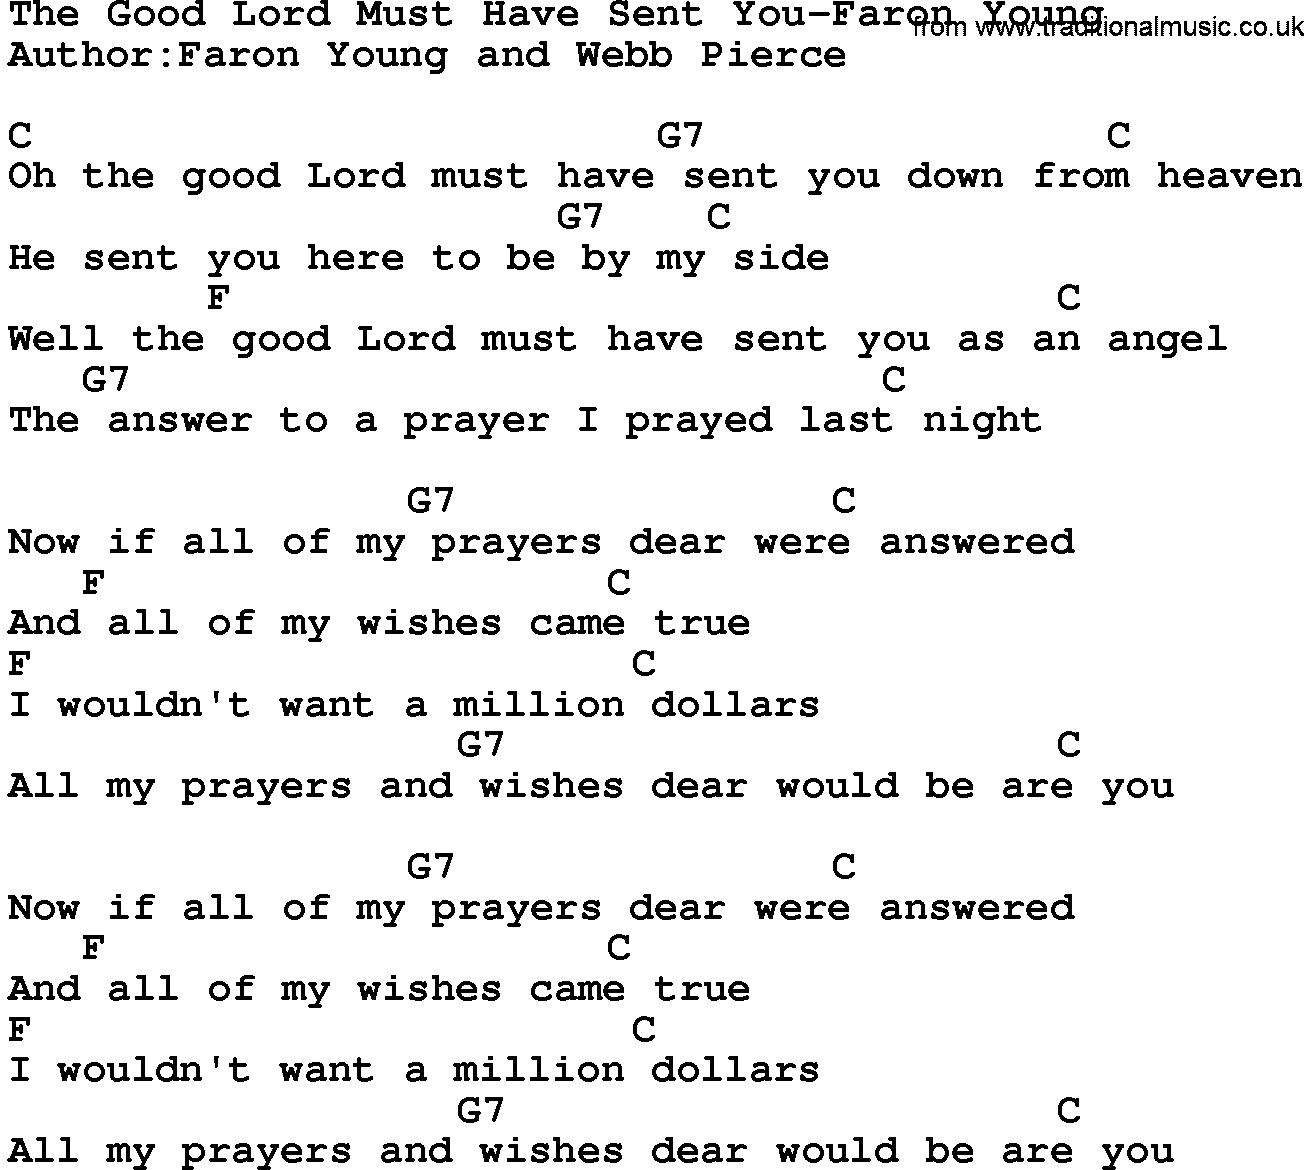 Country music song: The Good Lord Must Have Sent You-Faron Young lyrics and chords